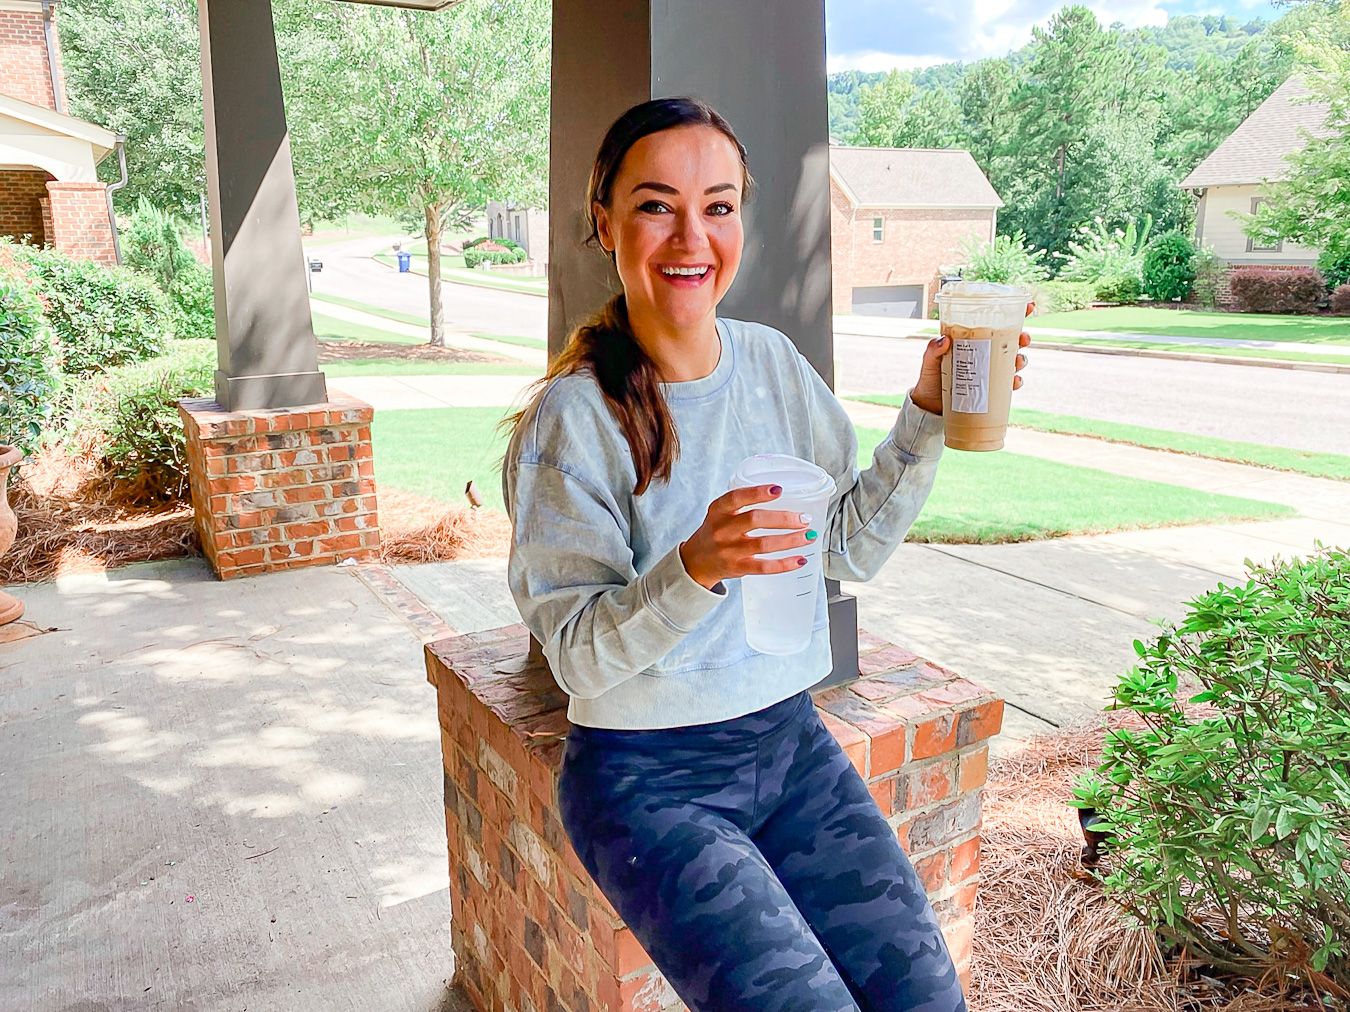 Top 5 Starbucks Low Carb Drinks To Enjoy This Fall by Alabama Food + Lifestyle blogger, My Life Well Loved